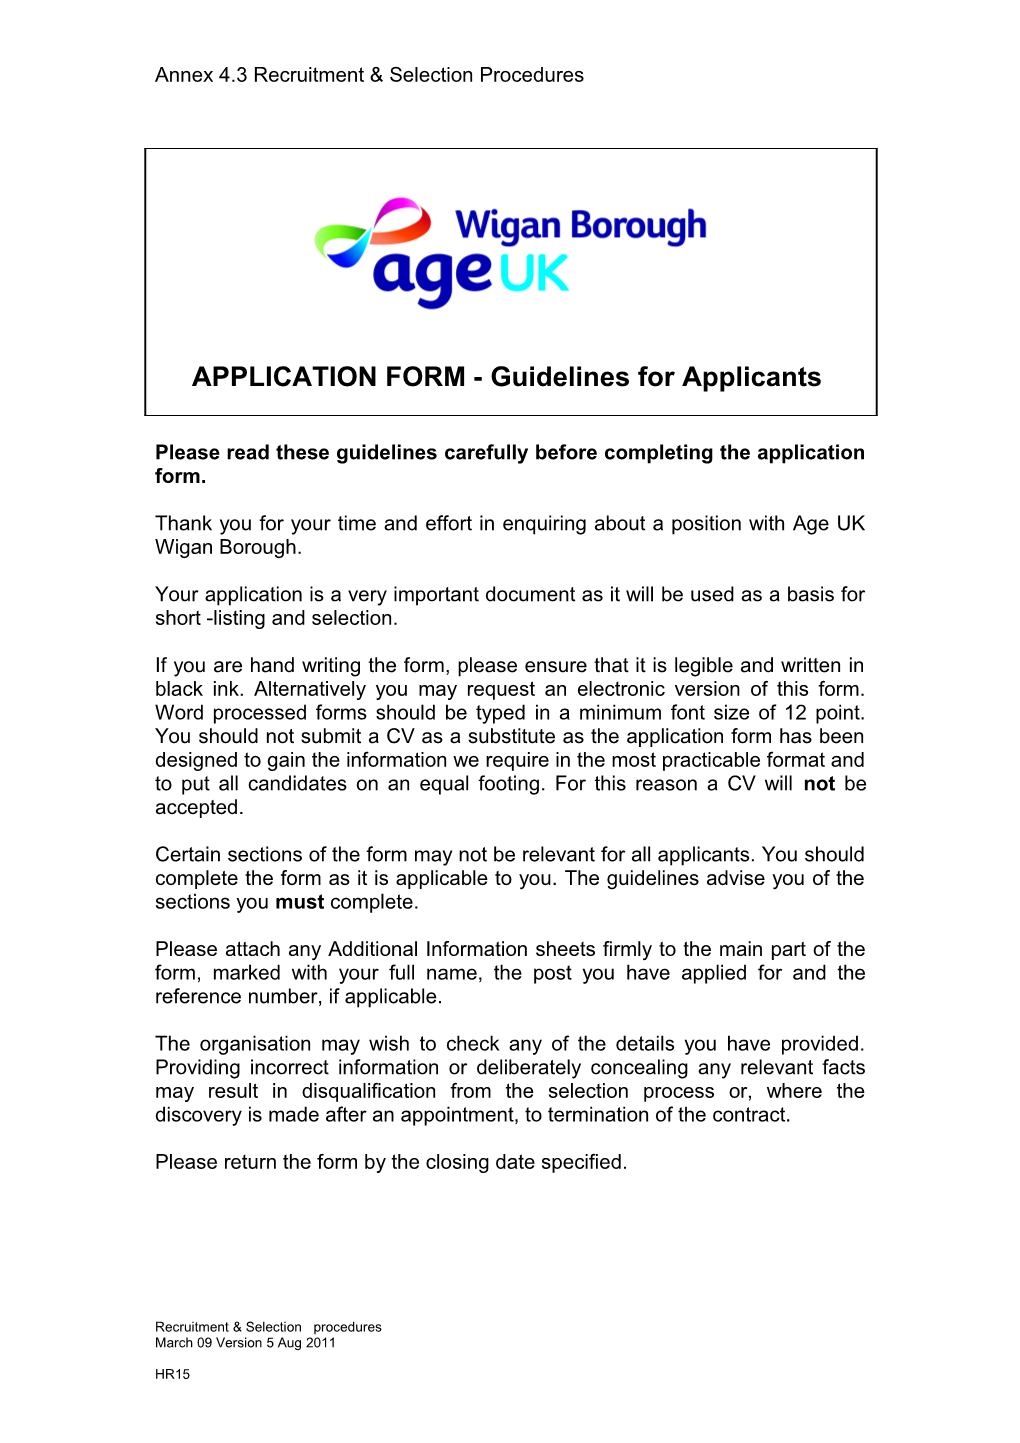 Please Read These Guidelines Carefully Before Completing the Application Form